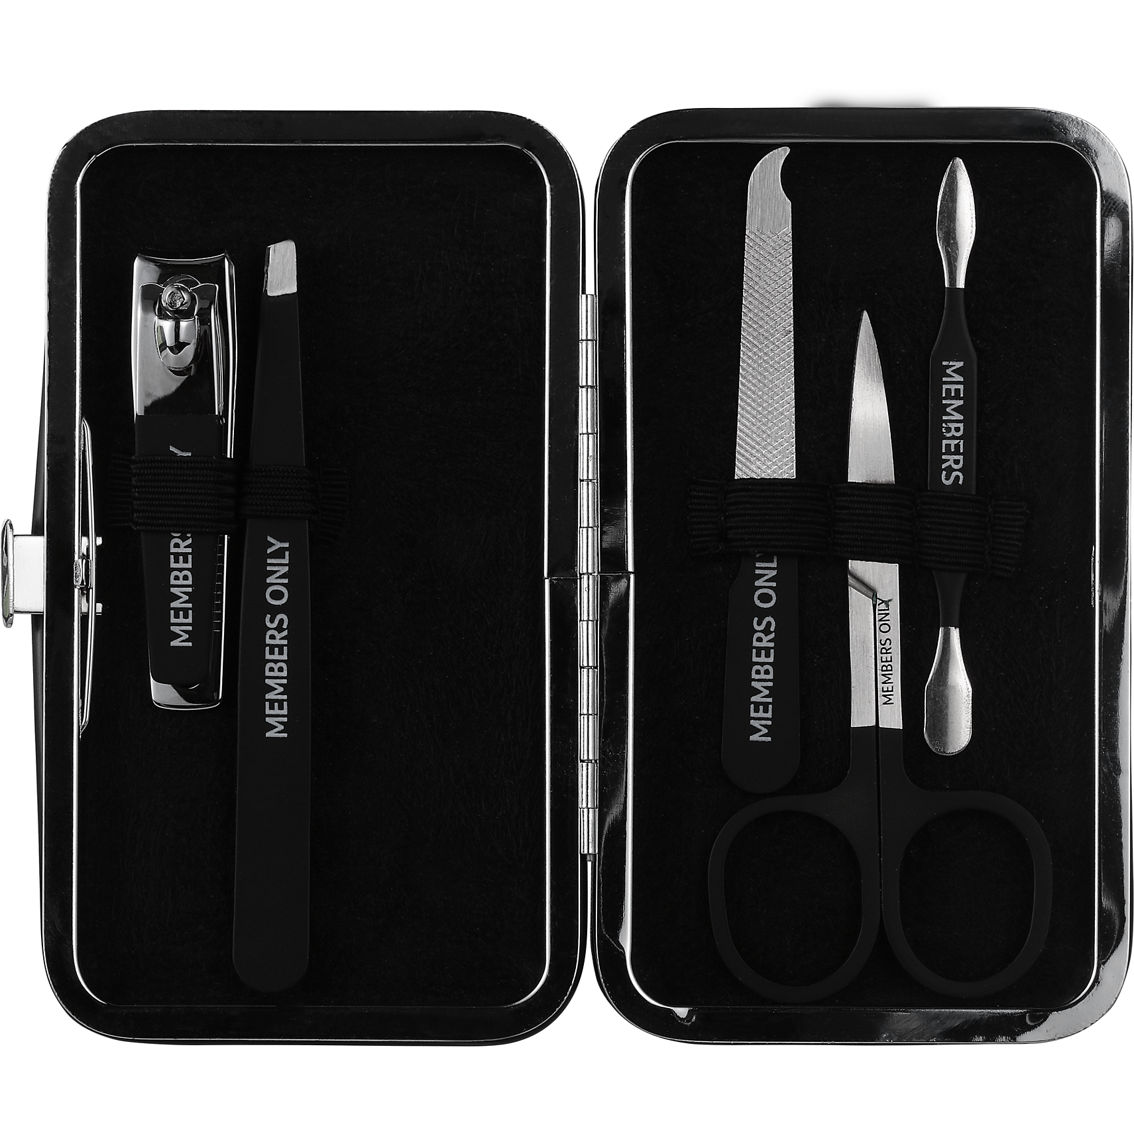 Members Only Stainless Steel Manicure and Grooming 6 pc. Set with Travel Case - Image 3 of 5